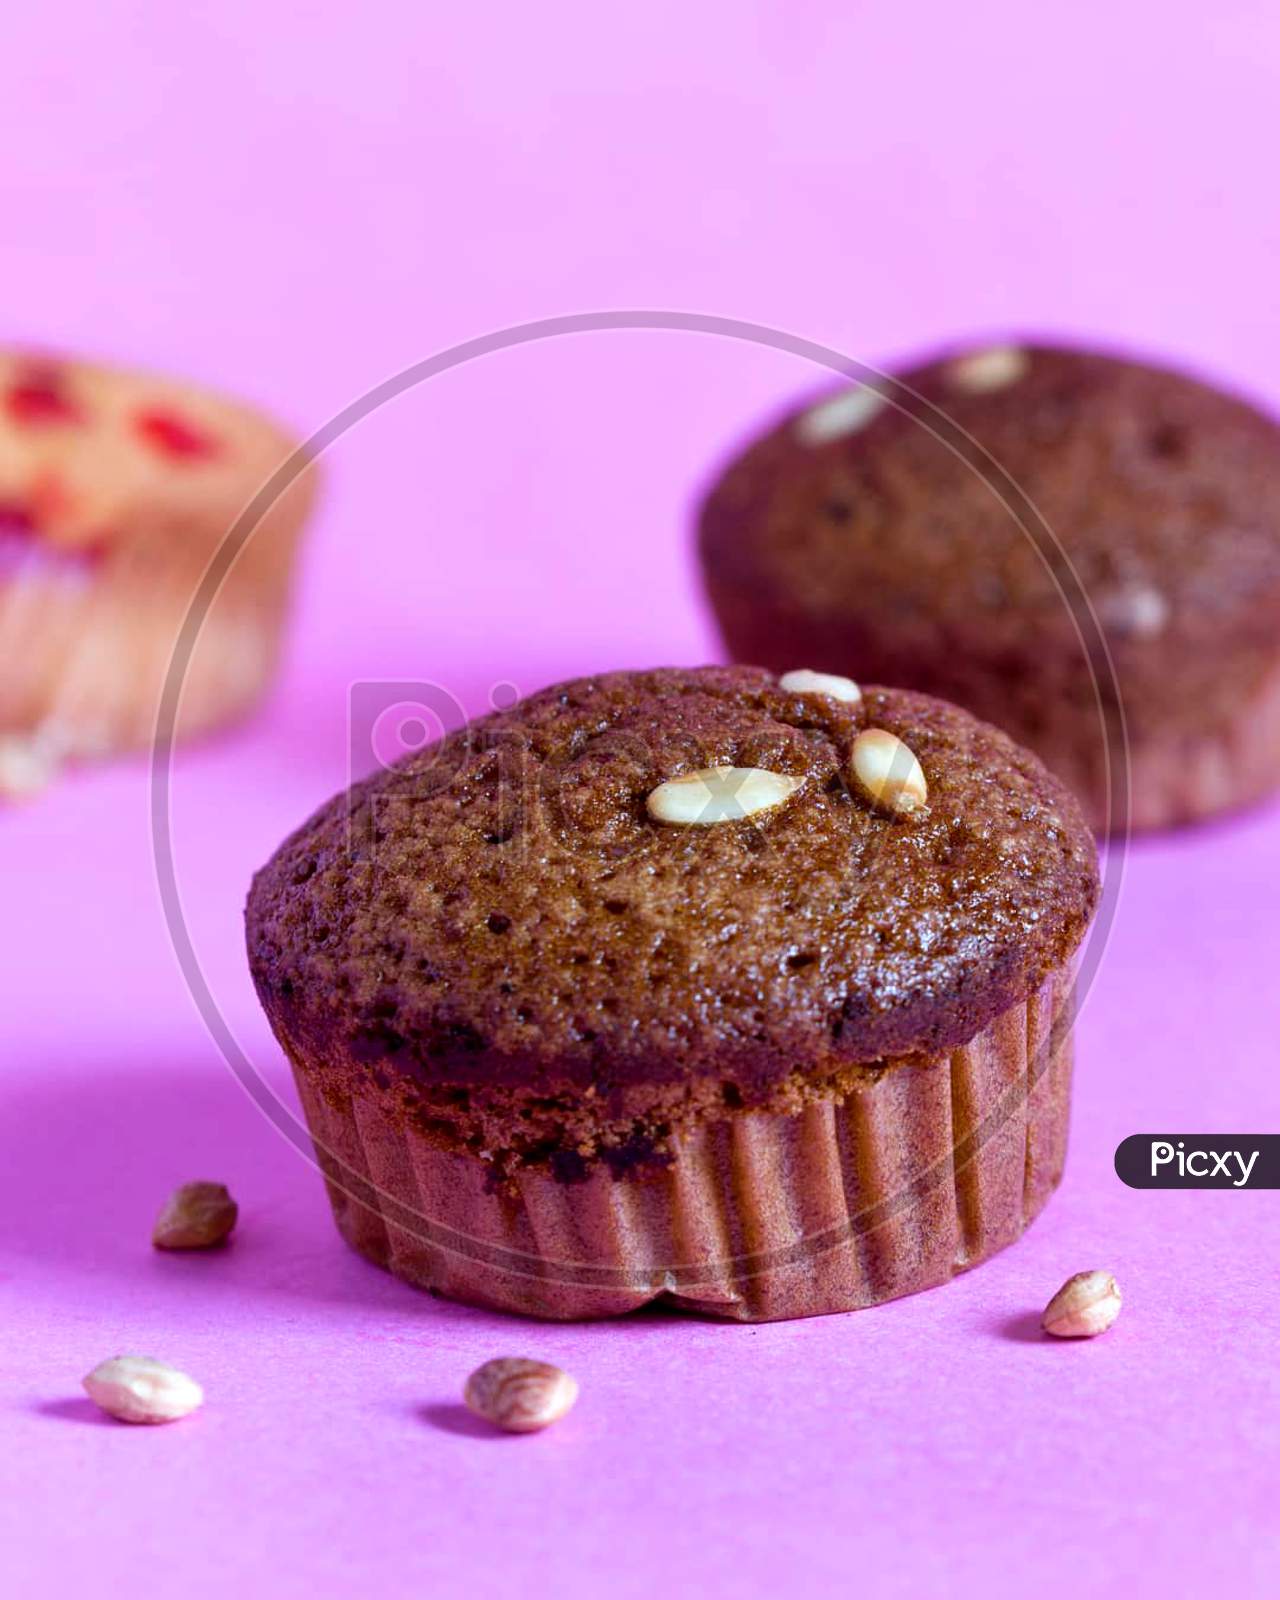 Chocolate cupcakes month watering with dry fruits in toppings